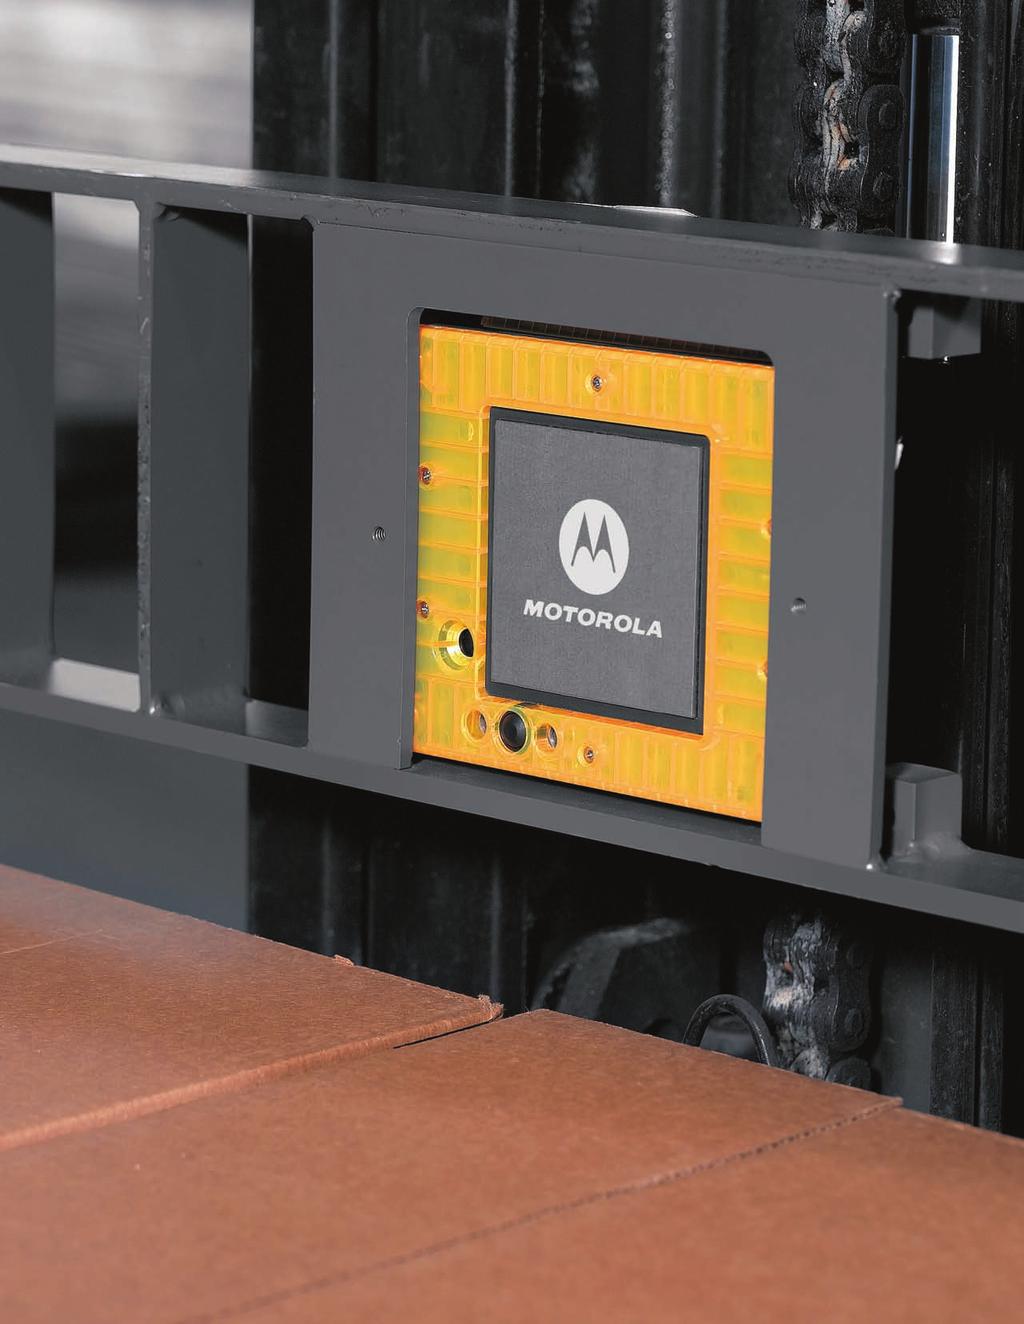 Motorola s RD5000 RFID mobile readers can be installed on forklifts and other material handling equipment as well as in challenging